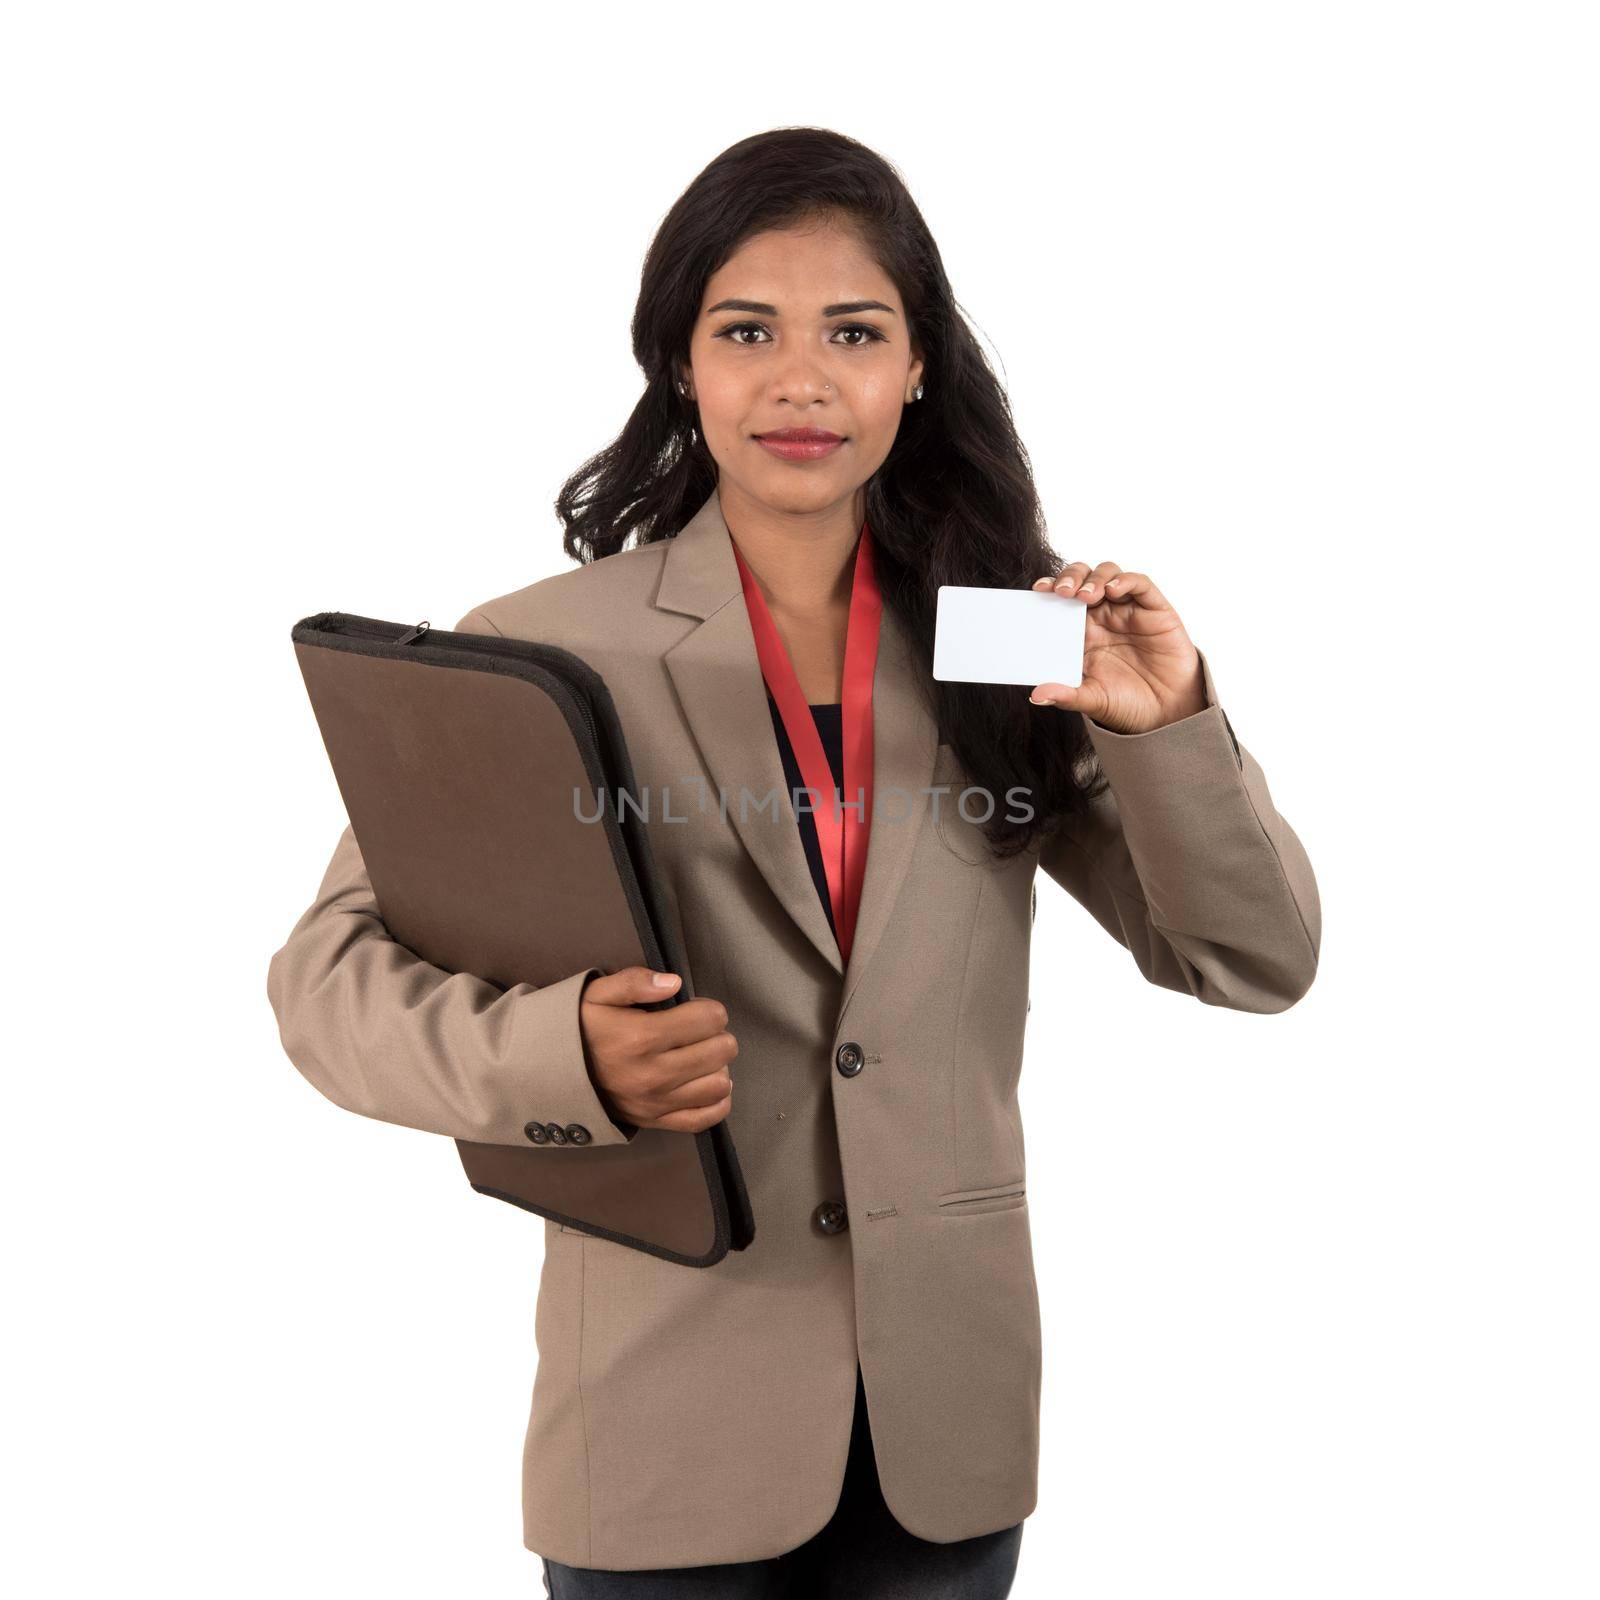 Smiling business woman holding a blank business card or ID card over white background by DipakShelare